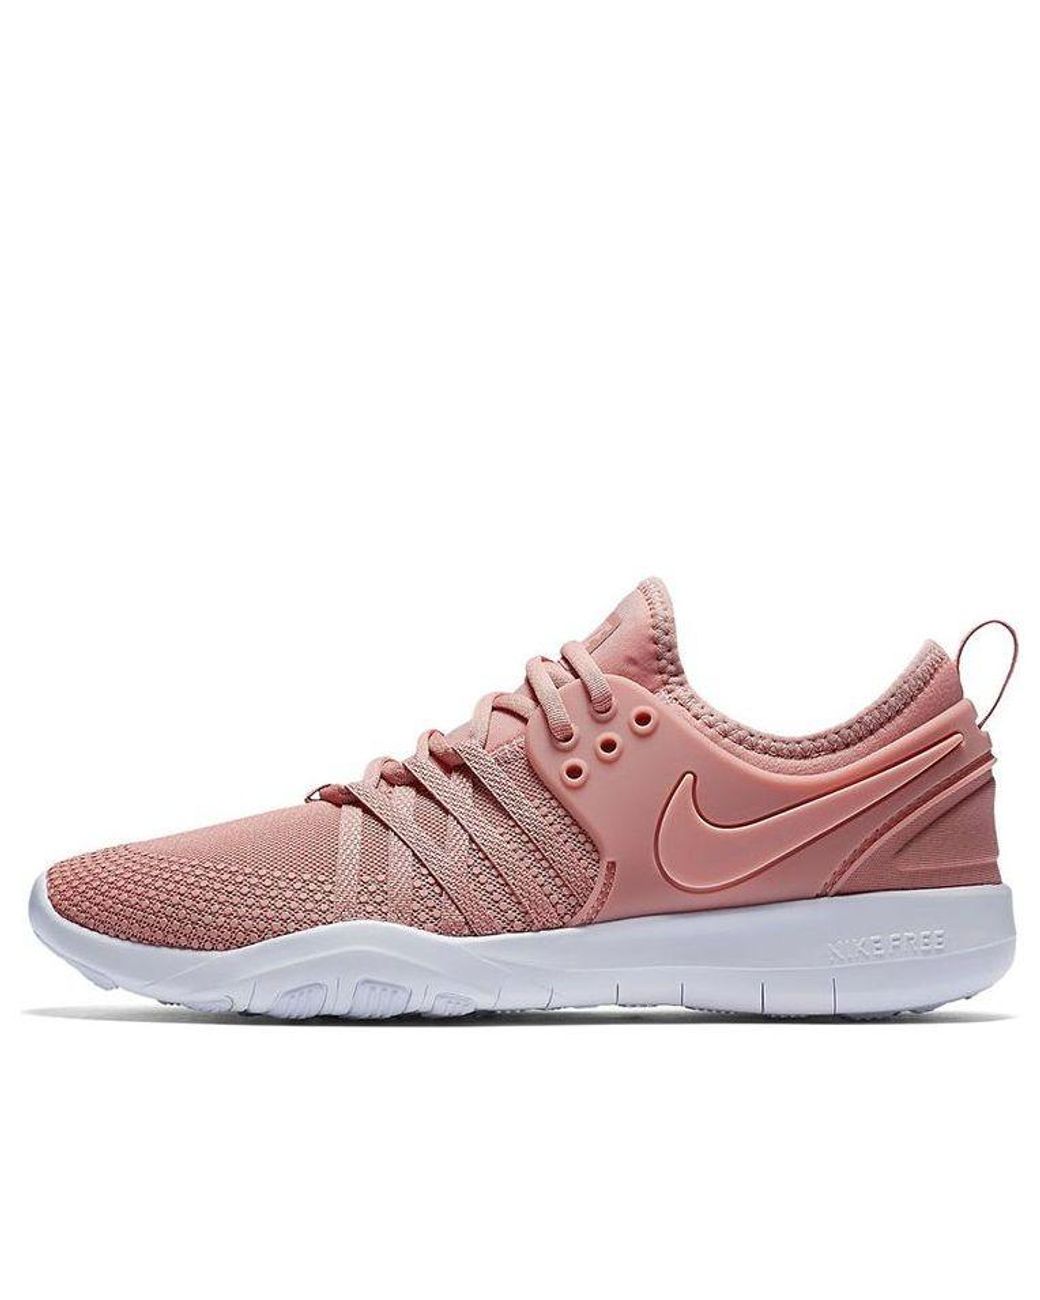 Nike Tr Trainer 7 Shoes Pink/white | Lyst